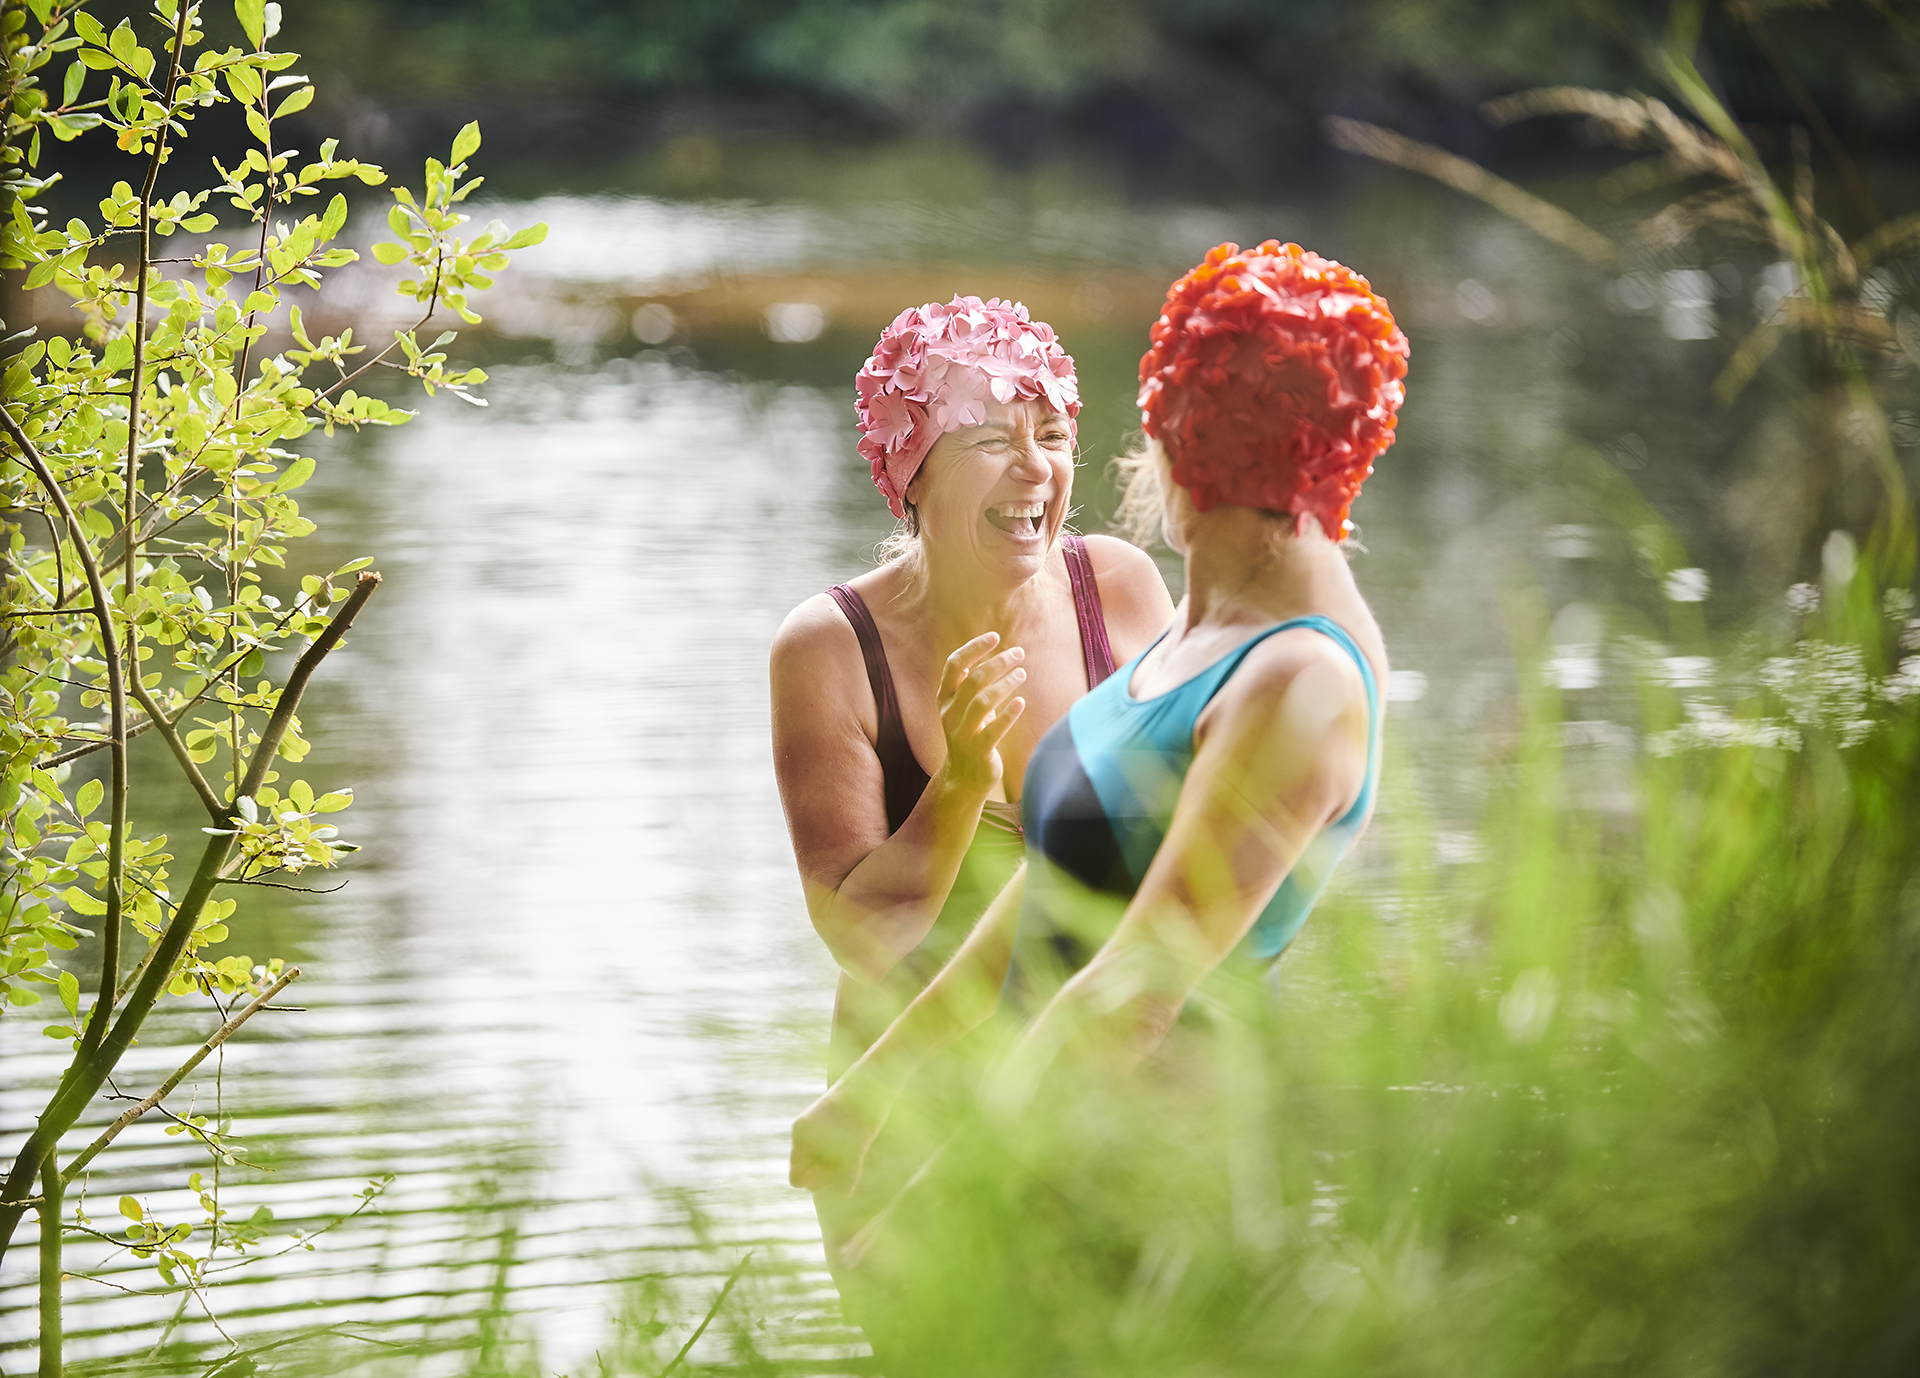 Two ladies laughing in a rural river